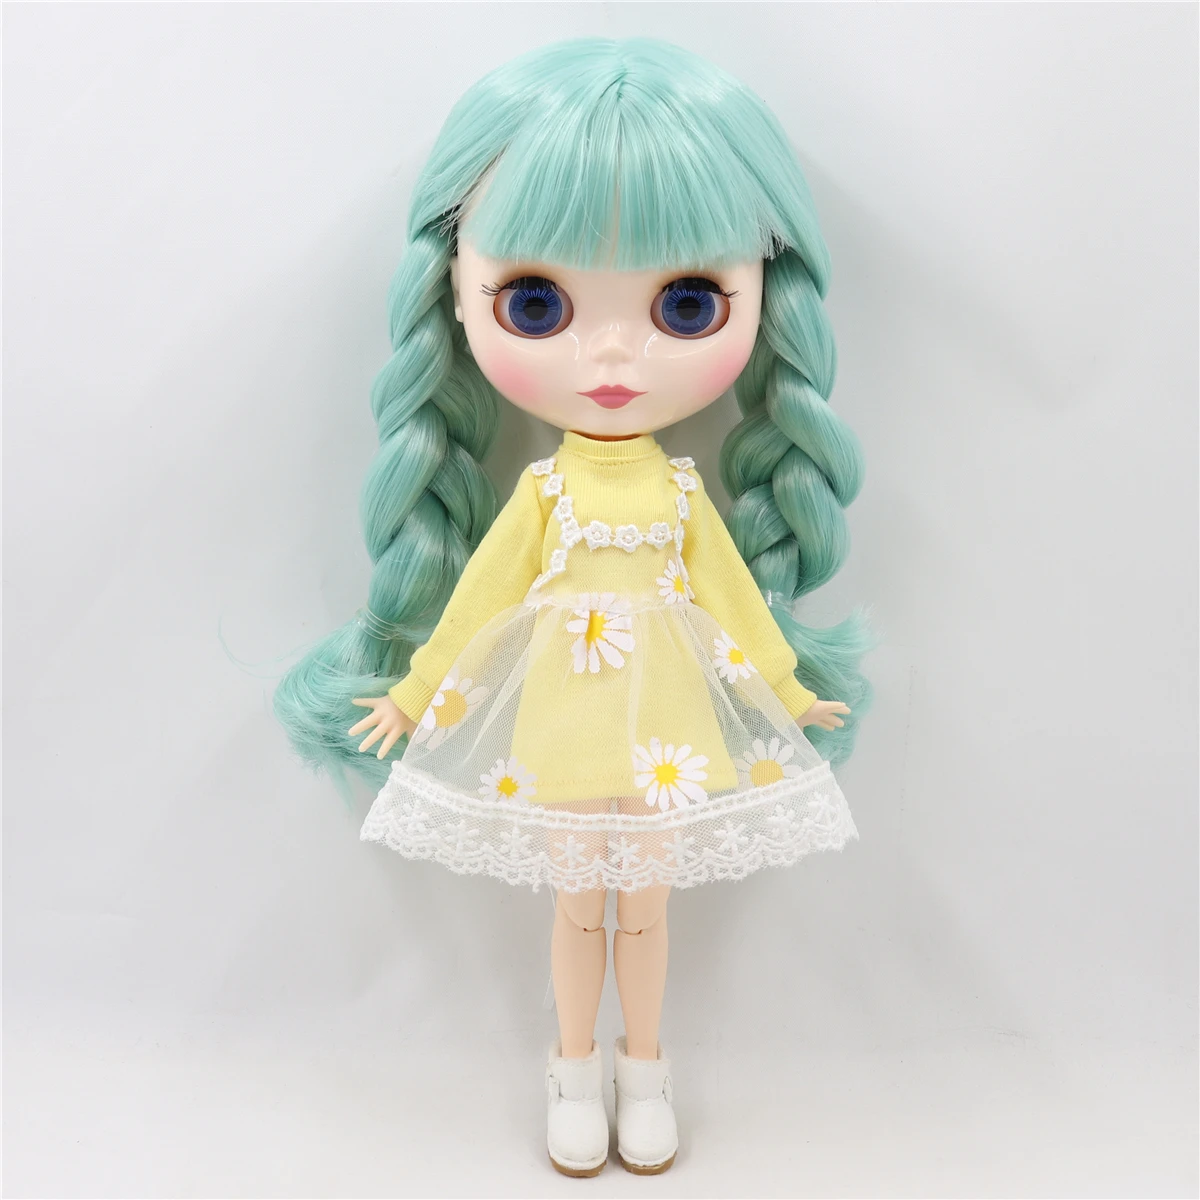 Neo Blythe Doll with Mint Hair, White Skin, Shiny Cute Face & Factory Jointed Body 1